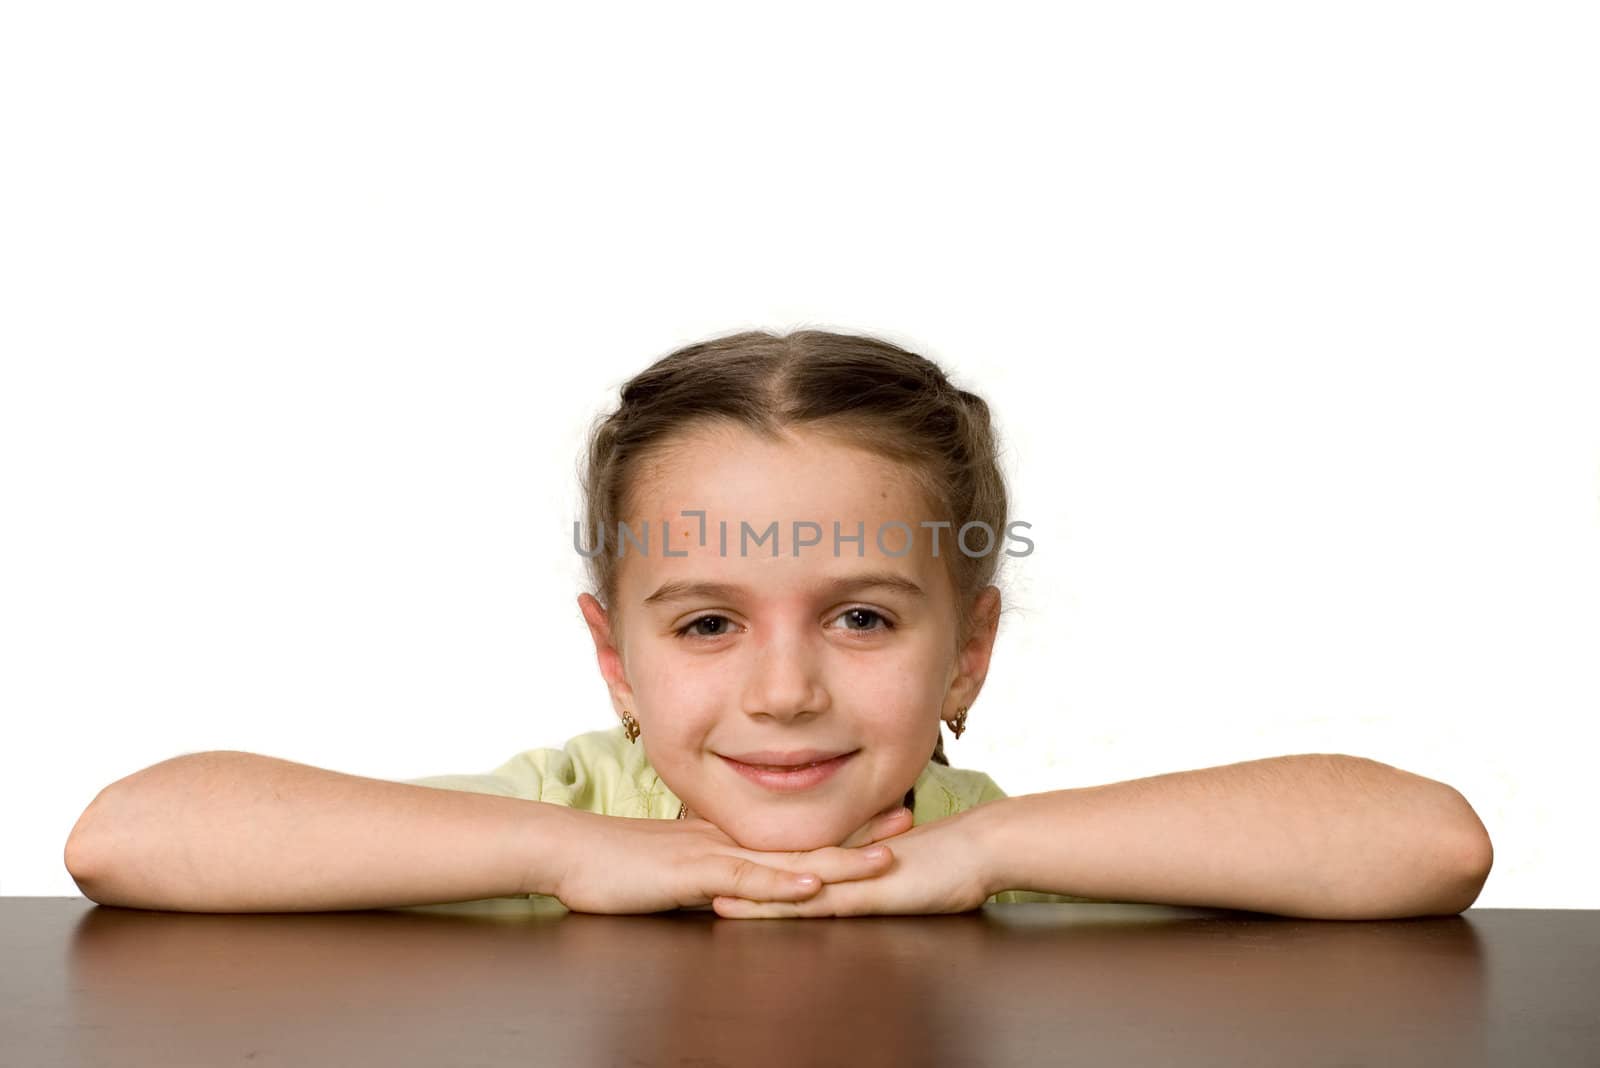 Nice girl on a table, white background